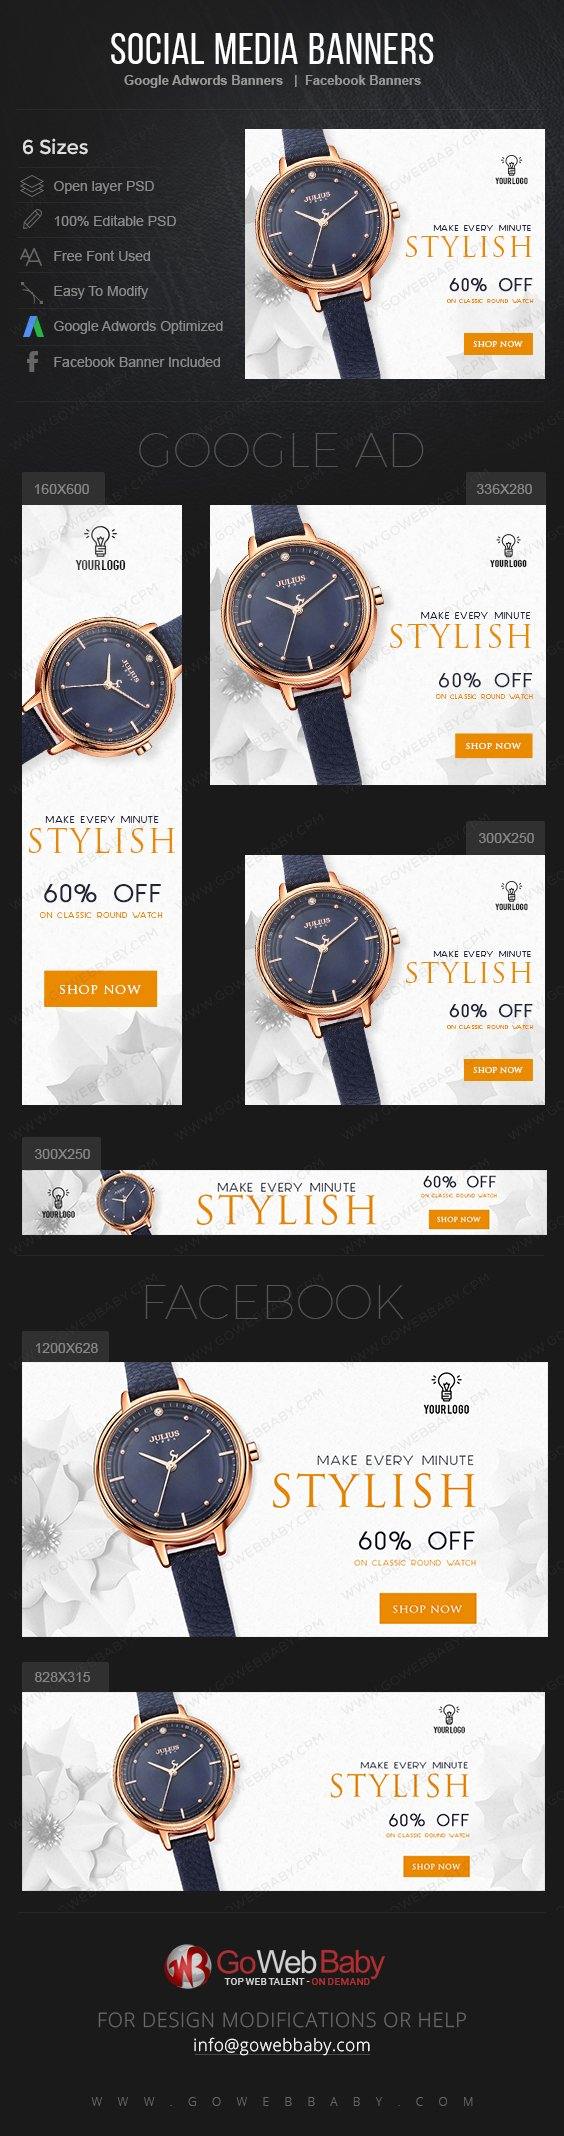 Google Adwords Display Banner With Facebook Banners - Stylish Watch For Website Marketing - GoWebBaby.Com